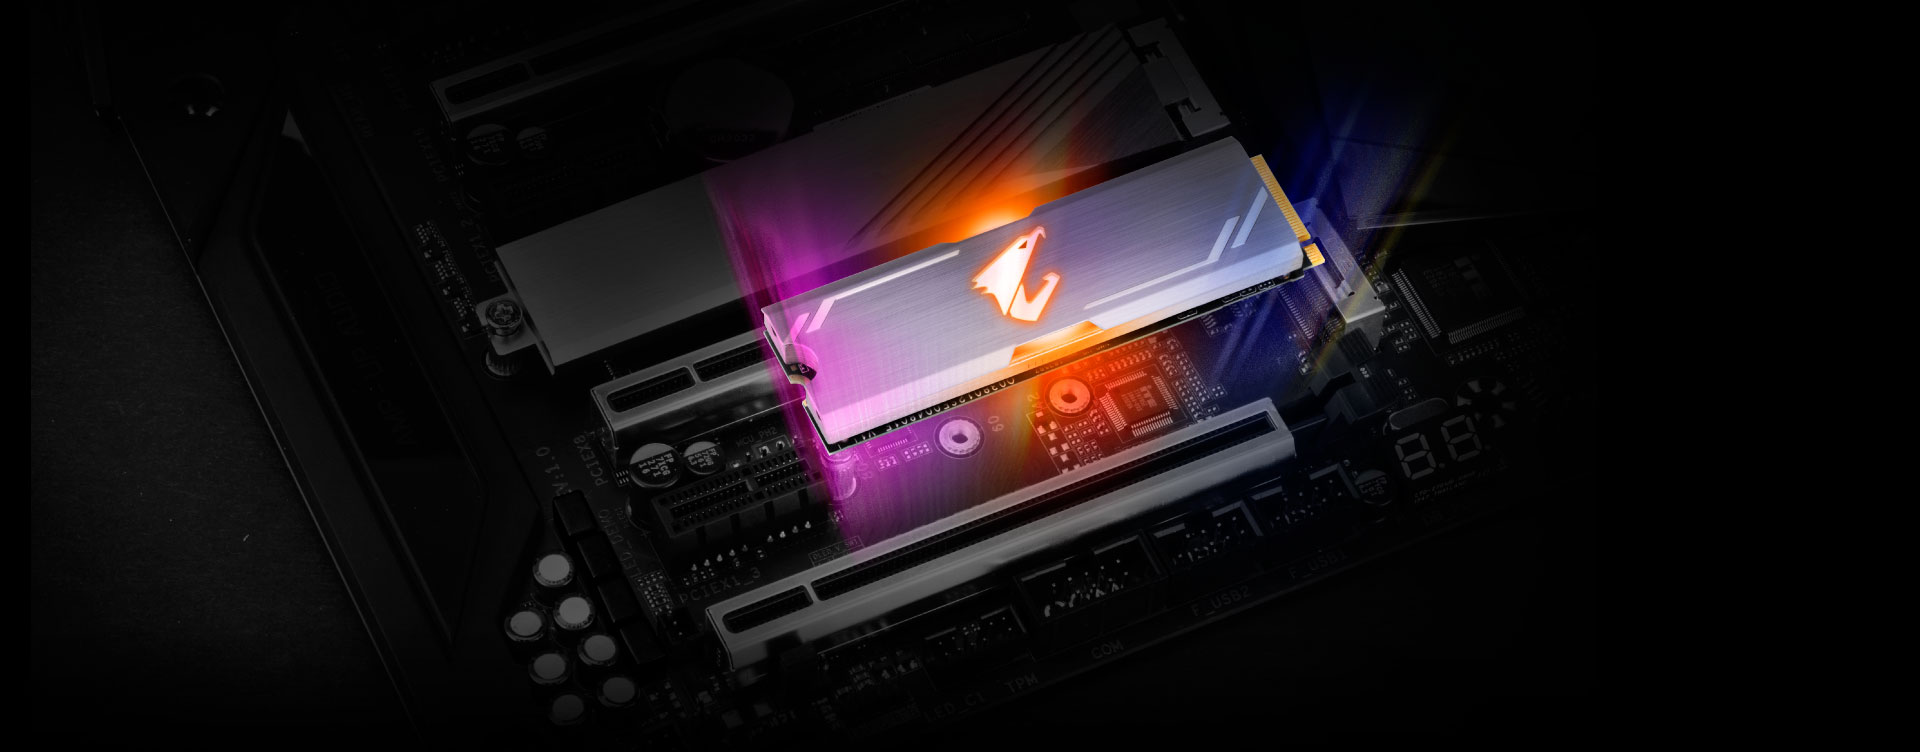 GIGABYTE SSD 512GB Key Features